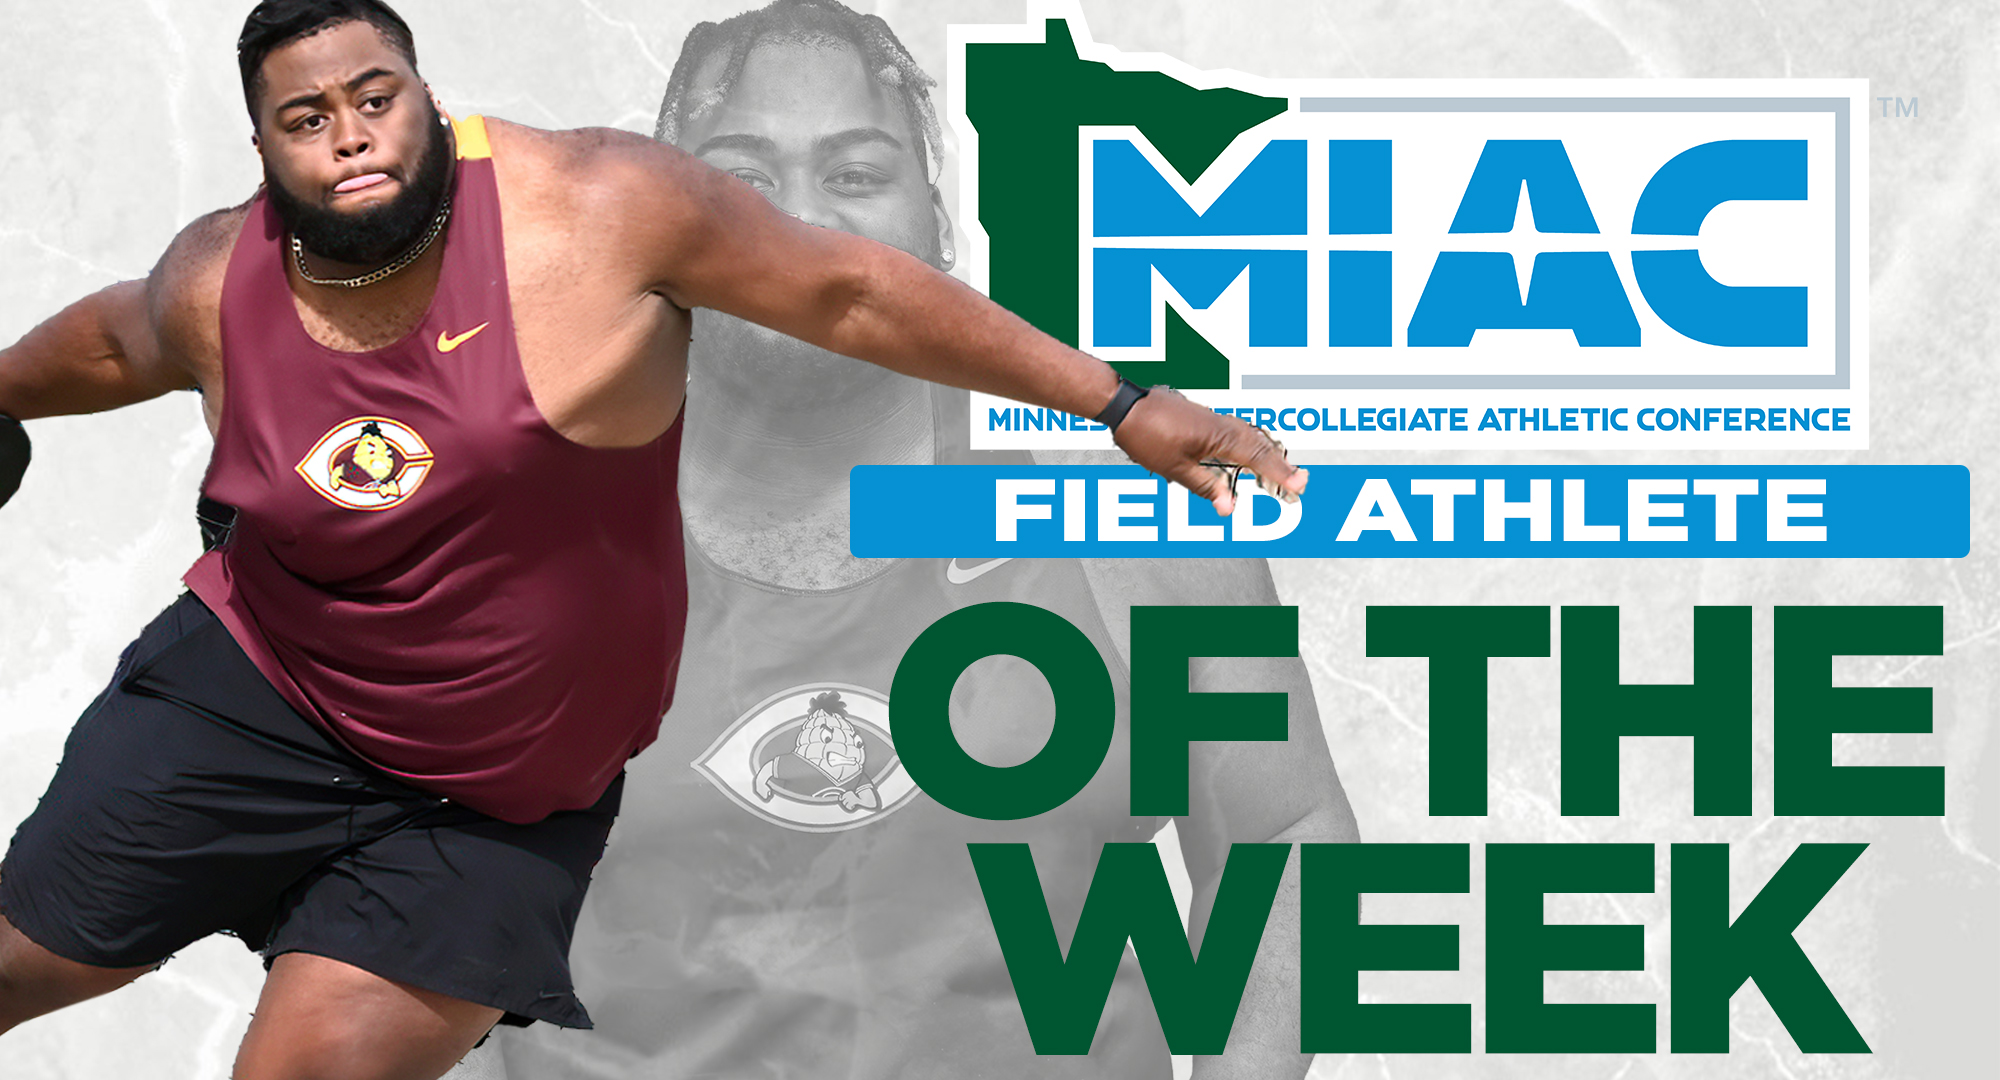 Cooper Folkestad was named the MIAC Field Athlete of the Week after posting NCAA DIII Top 15 marks in both the shot put and discus.